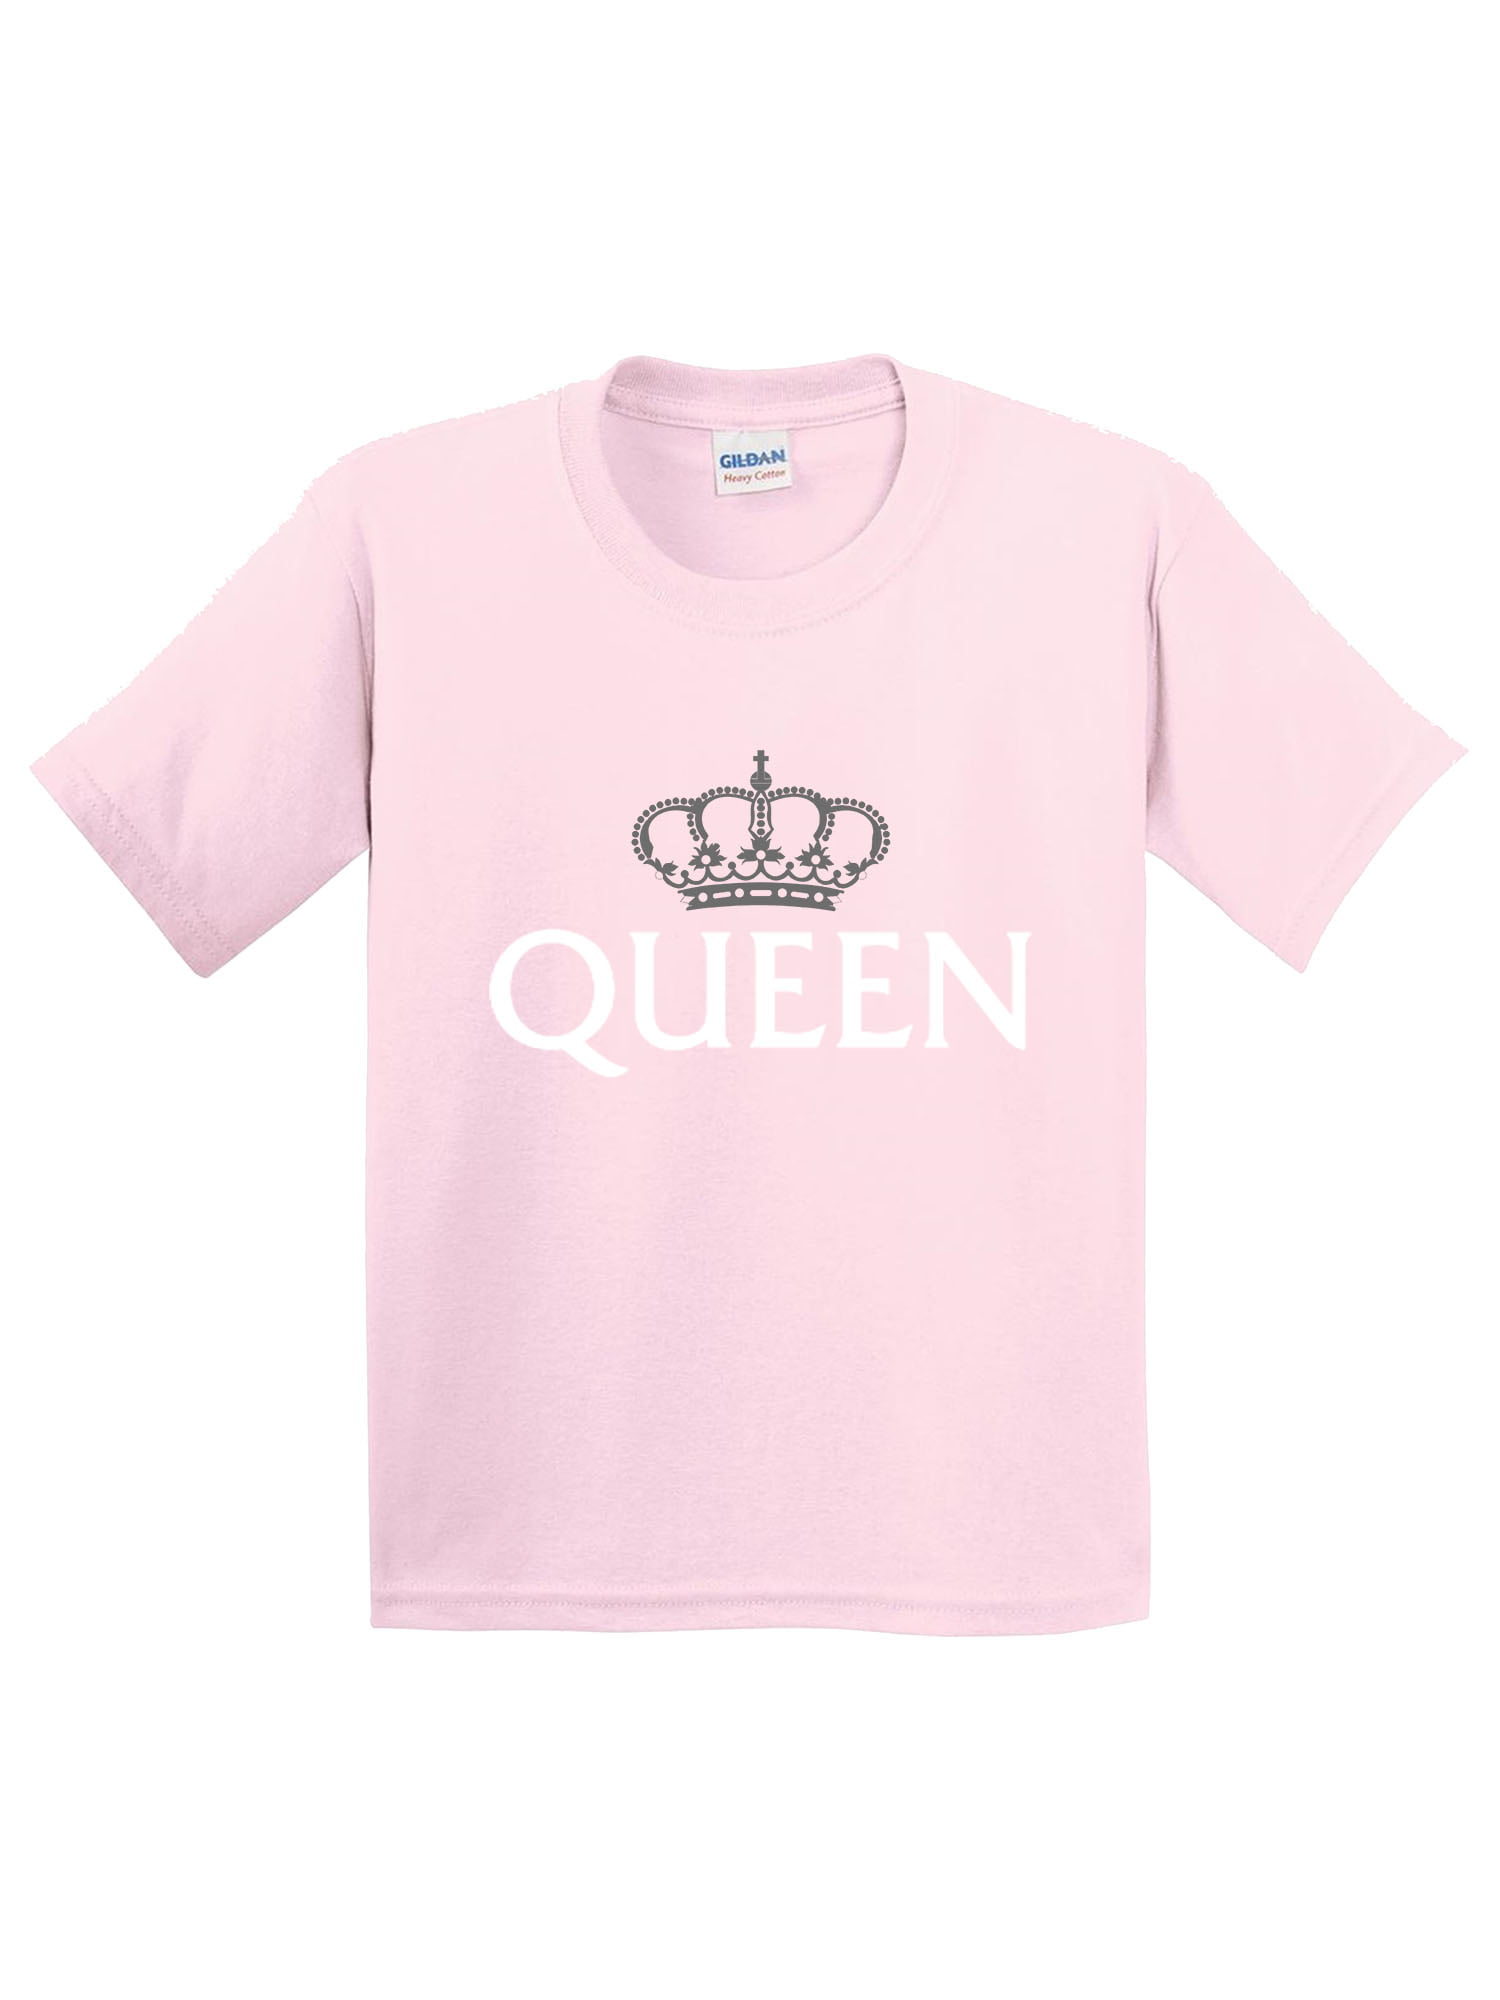 Cute Baby Bodysuits and Kids Shirts Little Royaltee Details about   LOVE Royals 